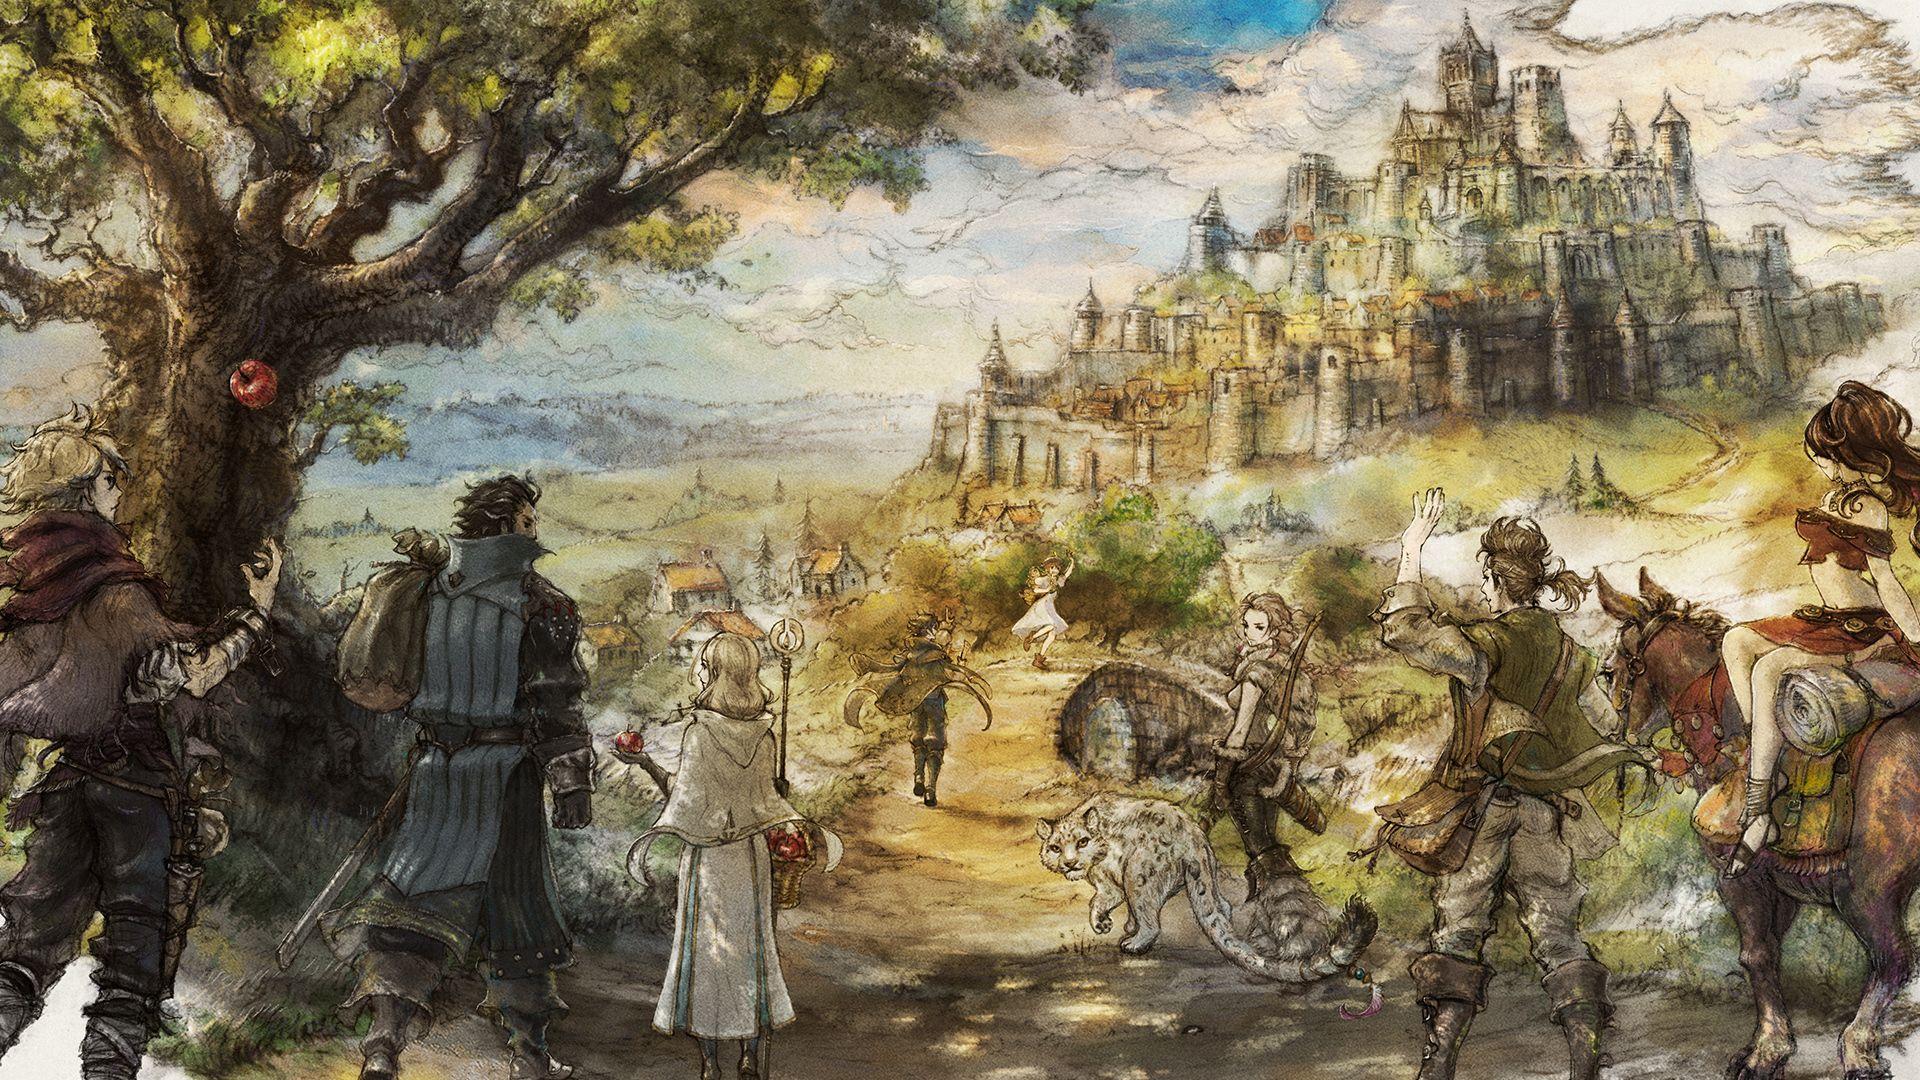 Octopath Traveler Soundtrack Is Now Available